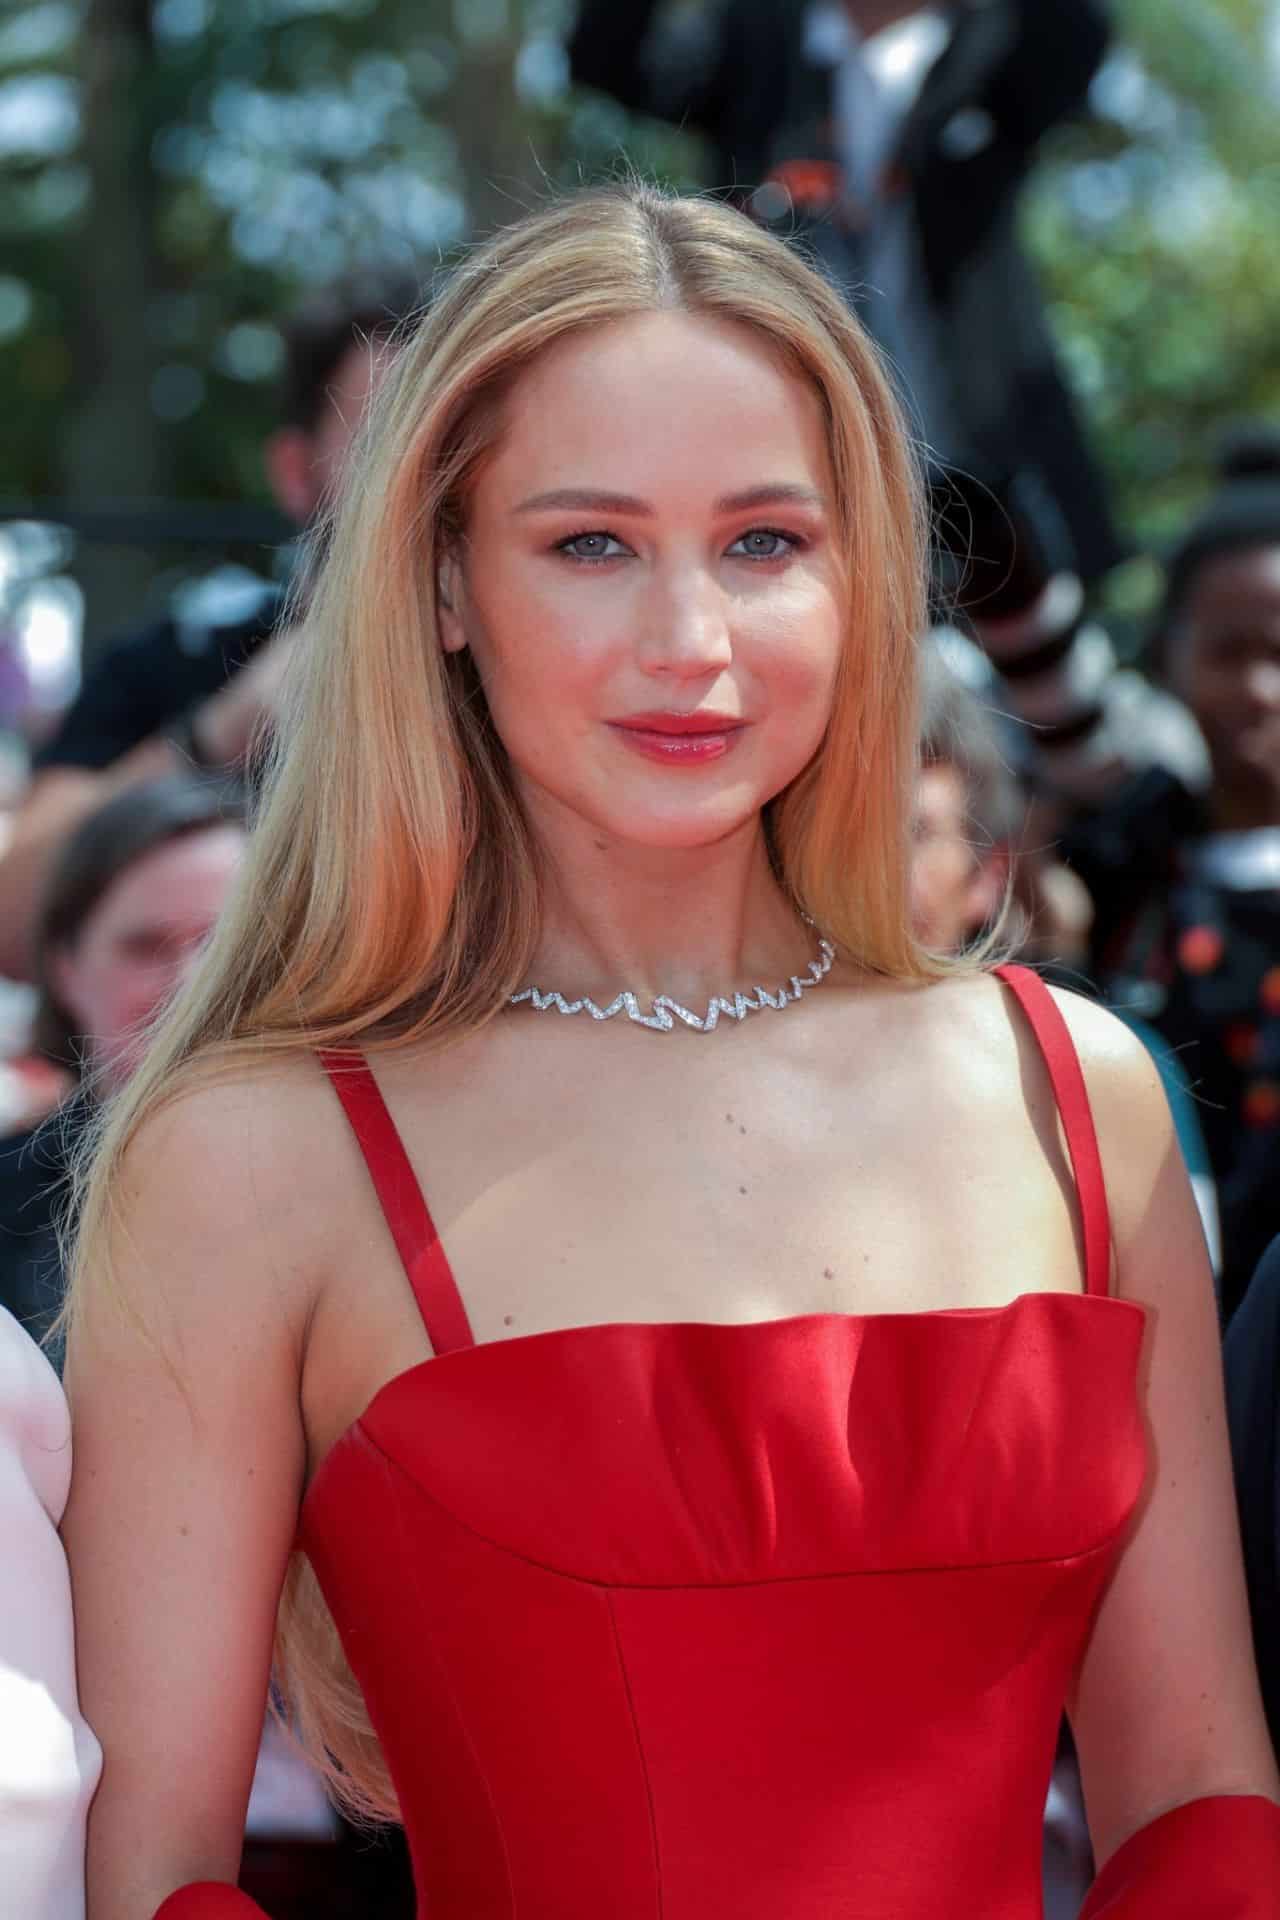 Jennifer Lawrence Stuns at Cannes at "Anatomy Of A Fall" Premiere